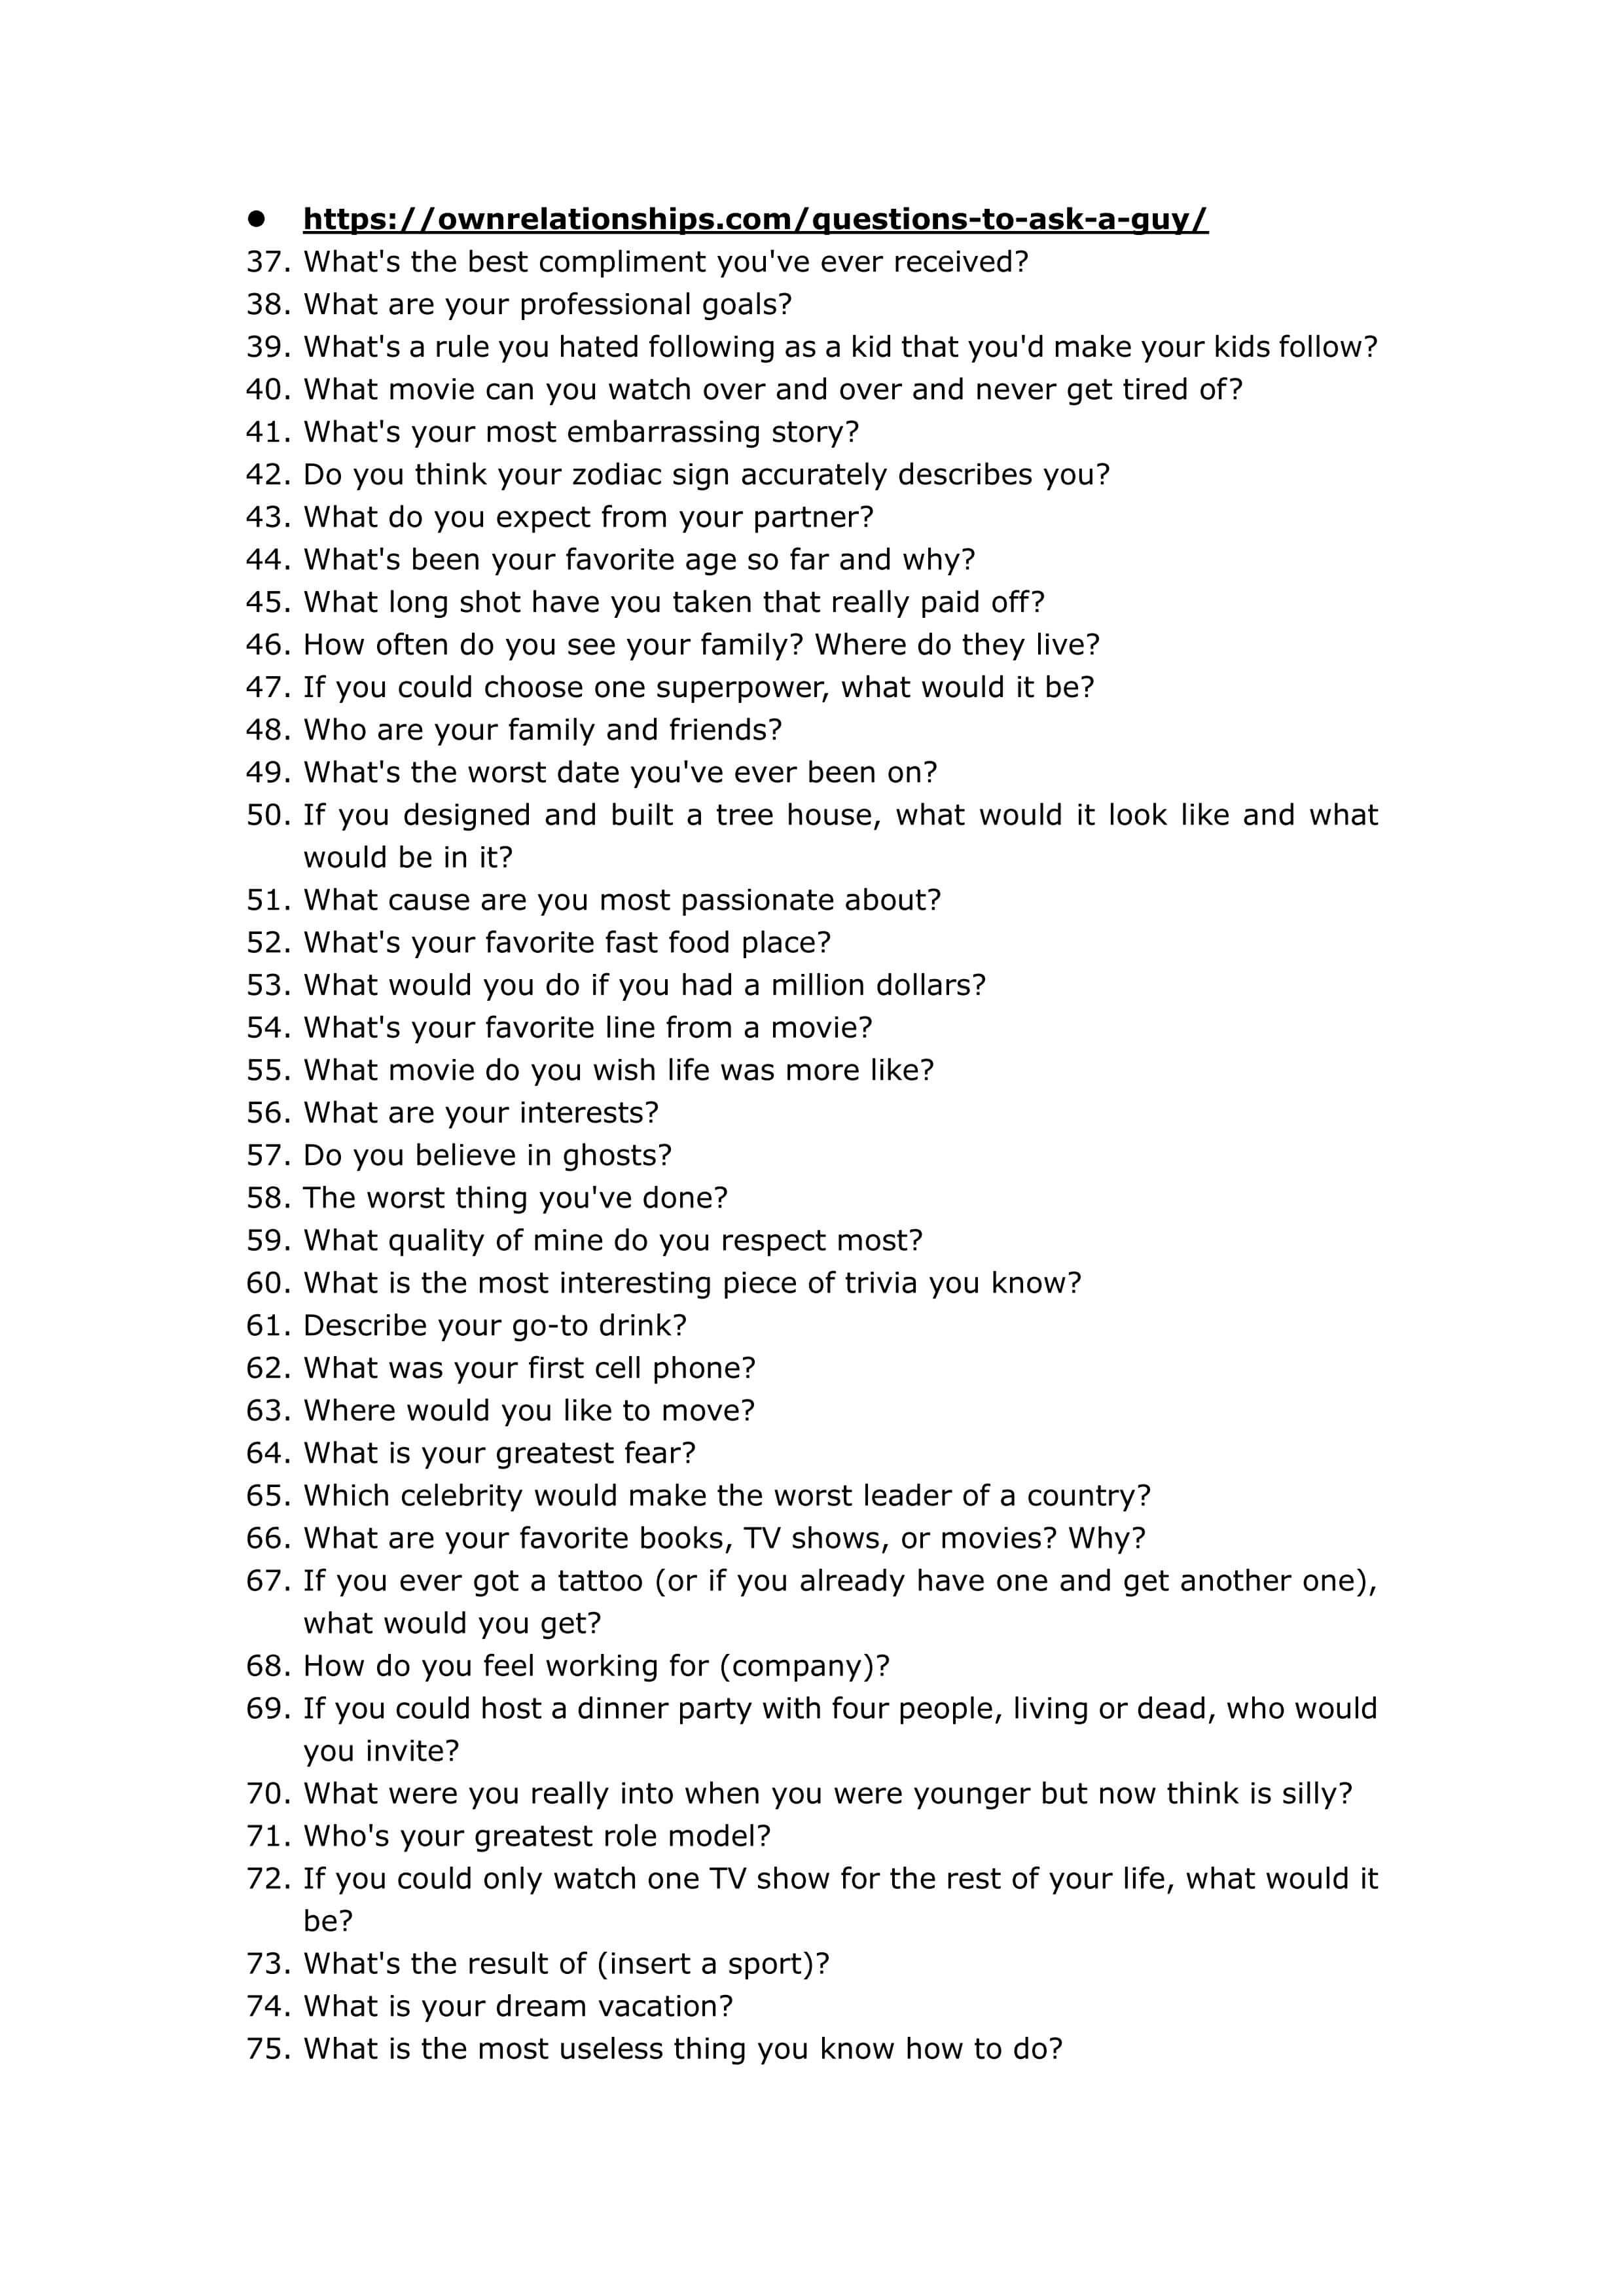 106 Extra Questions to Ask a Guy 02